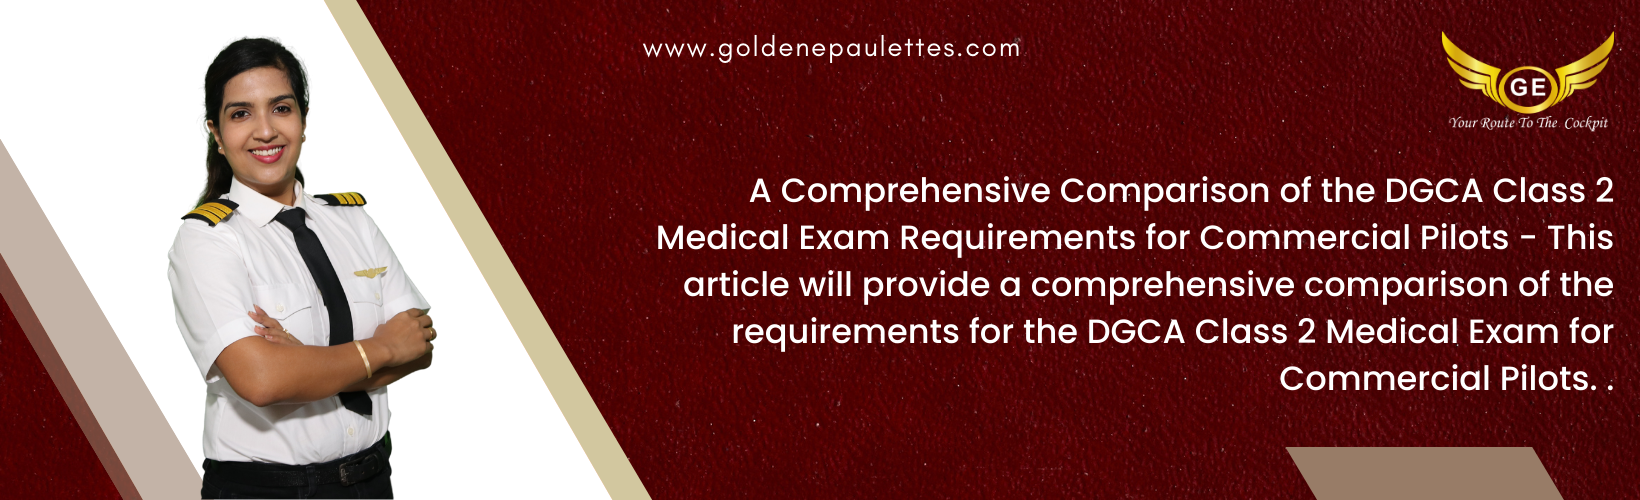 A Comparison of the Requirements for the DGCA Class 2 Medical Exam for Commercial Pilots - This article will compare the requirements for the DGCA Class 2 Medical Exam for Commercial Pilots. It will discuss the differences between the exams for different types of pilots. (Reference